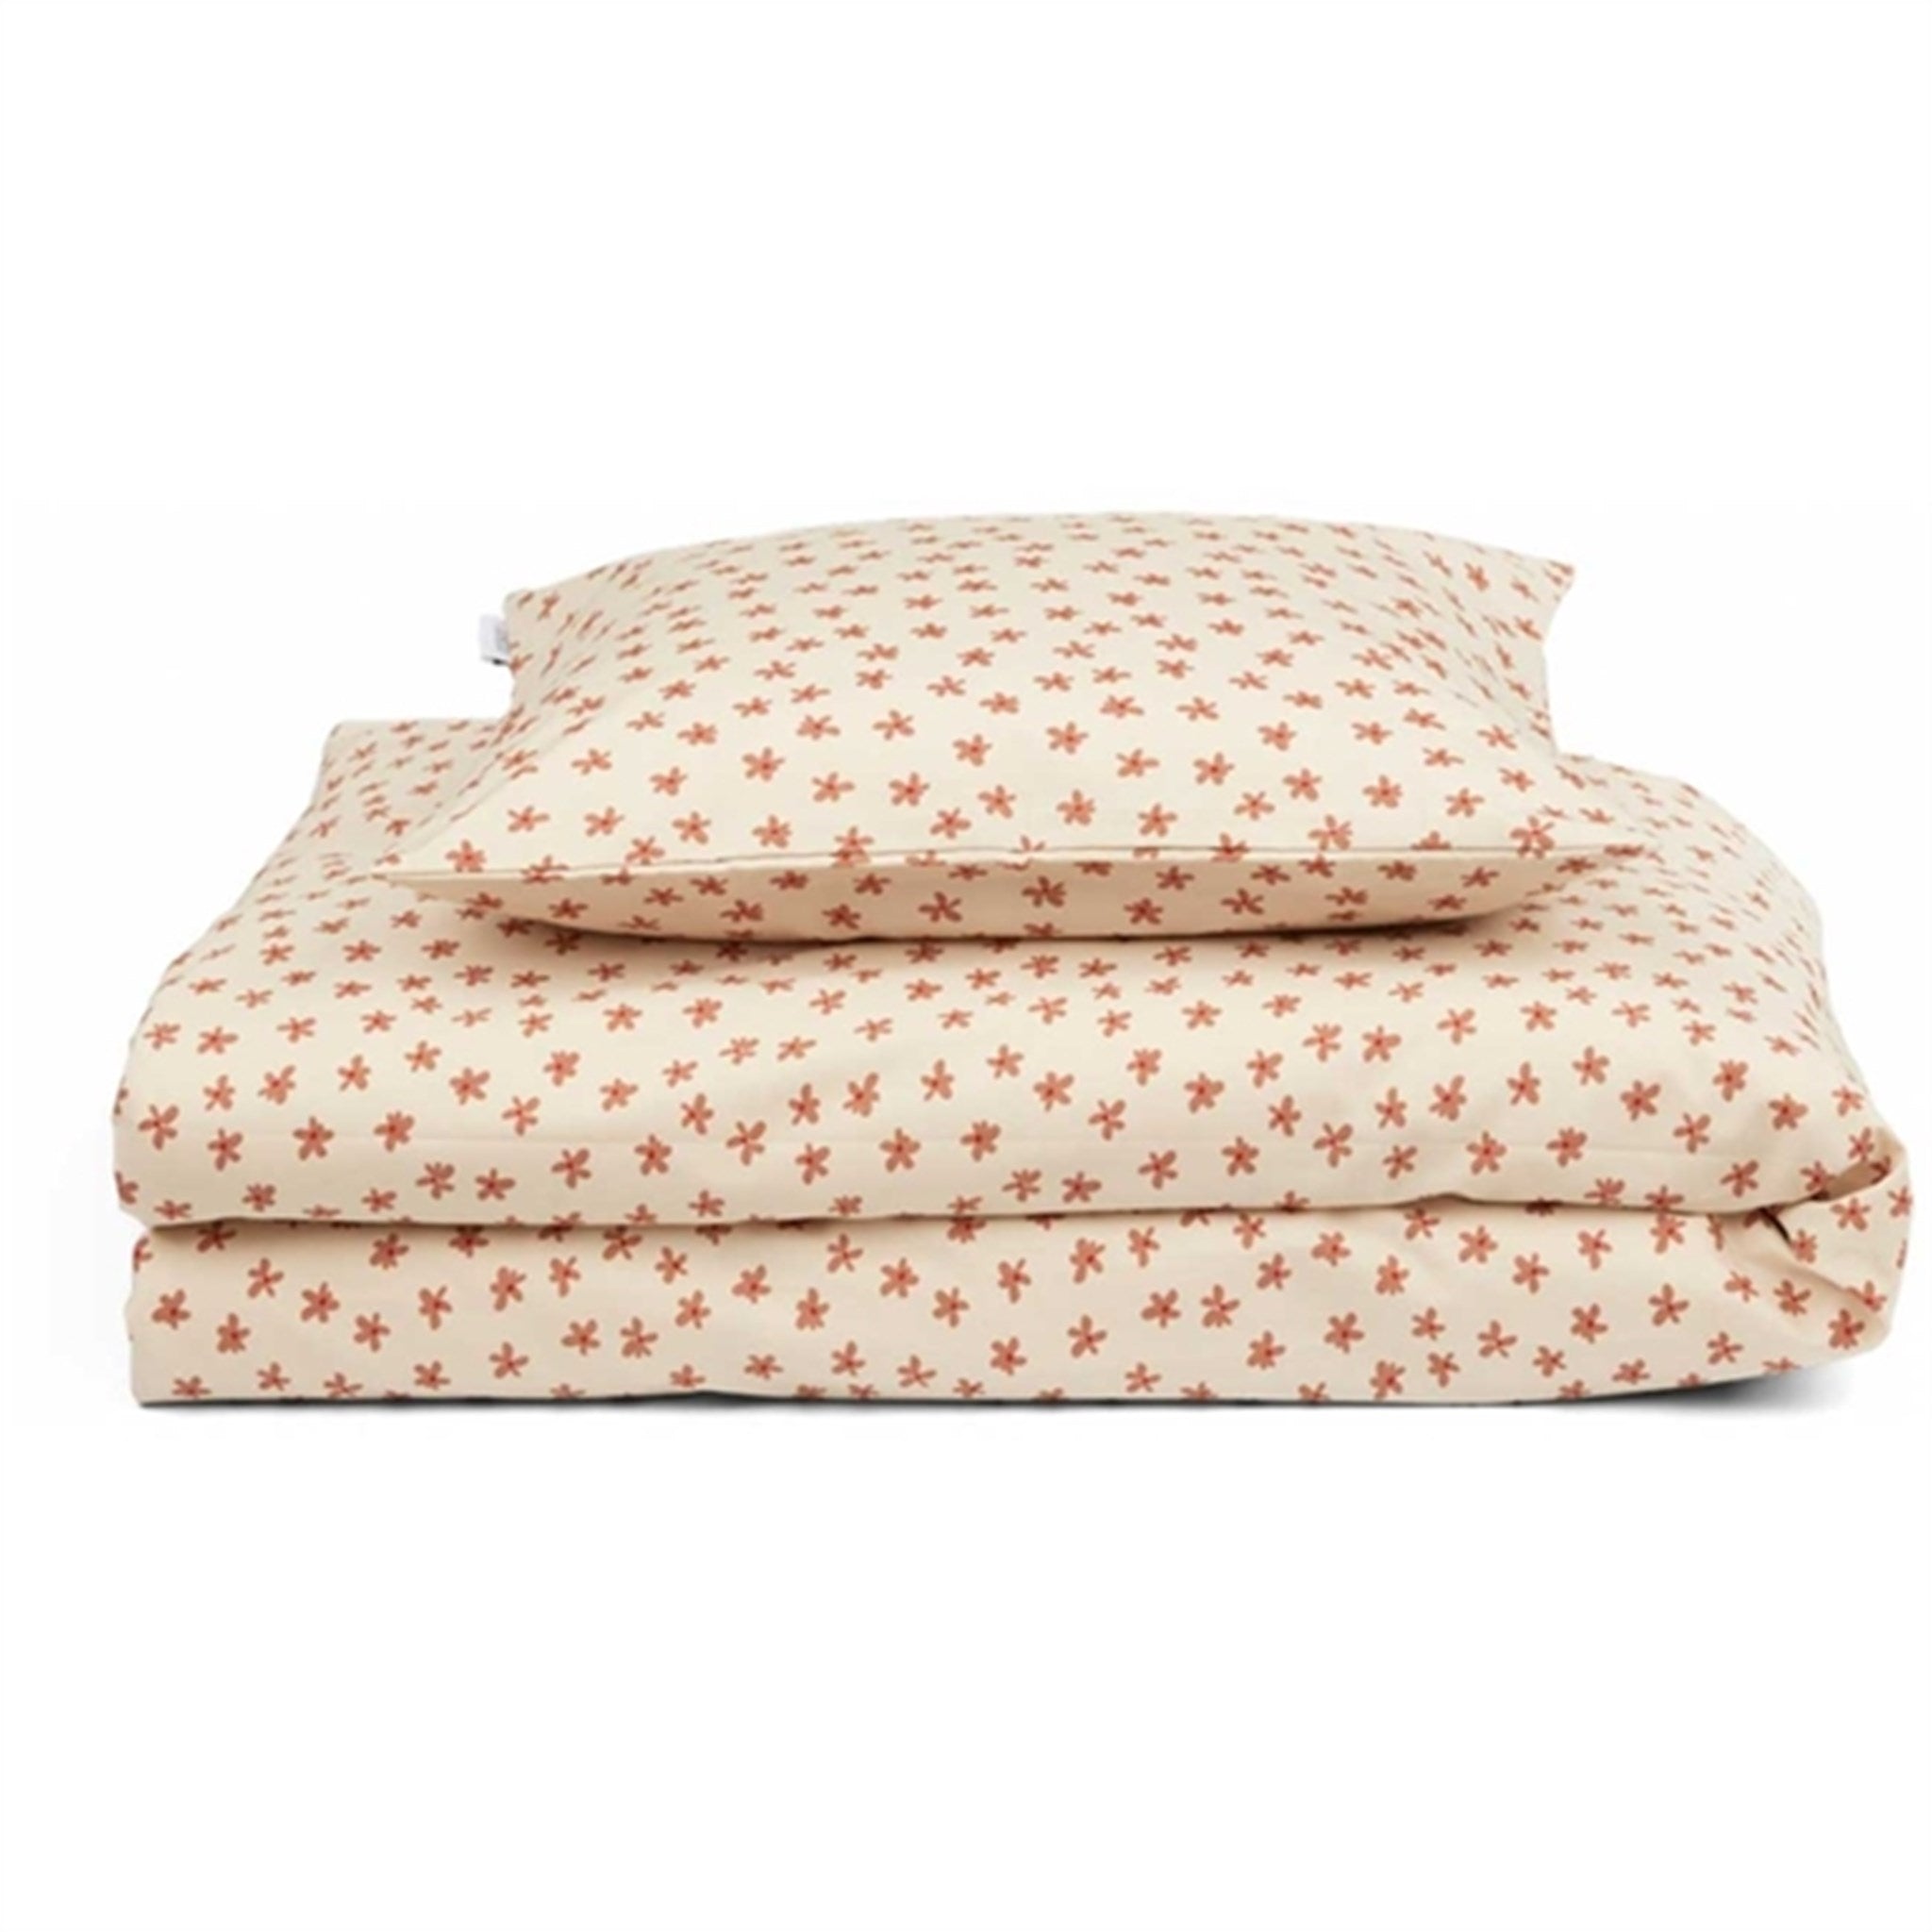 Liewood Bedding Floral/Sea Shell